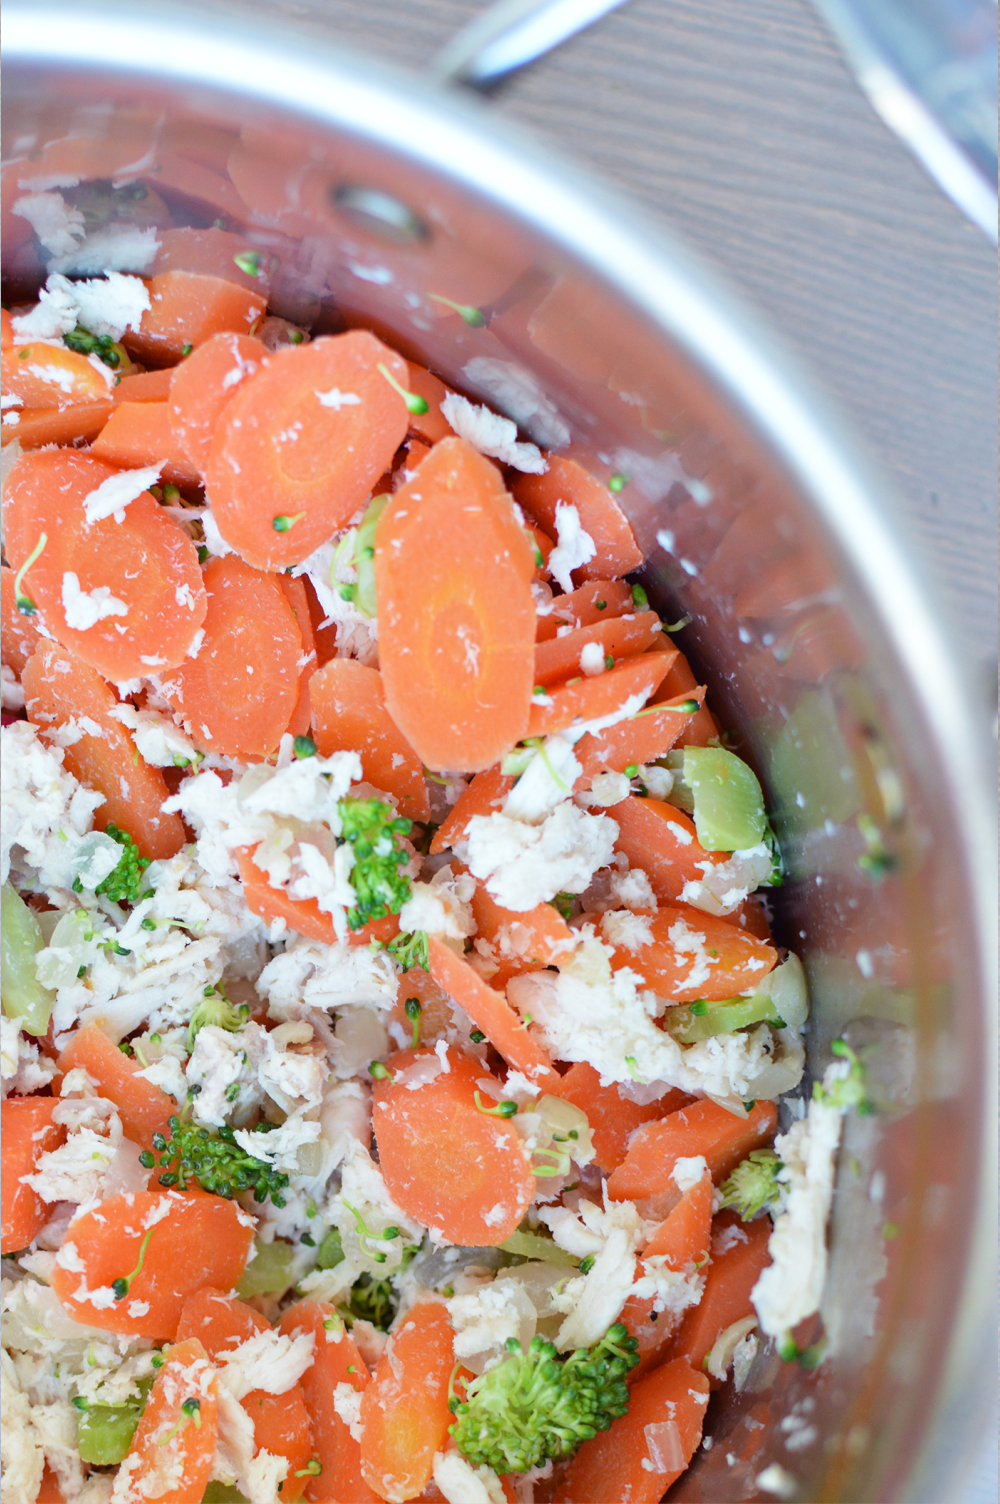 close up shot of pot filled with shredded chicken, sliced carrots, broccoli